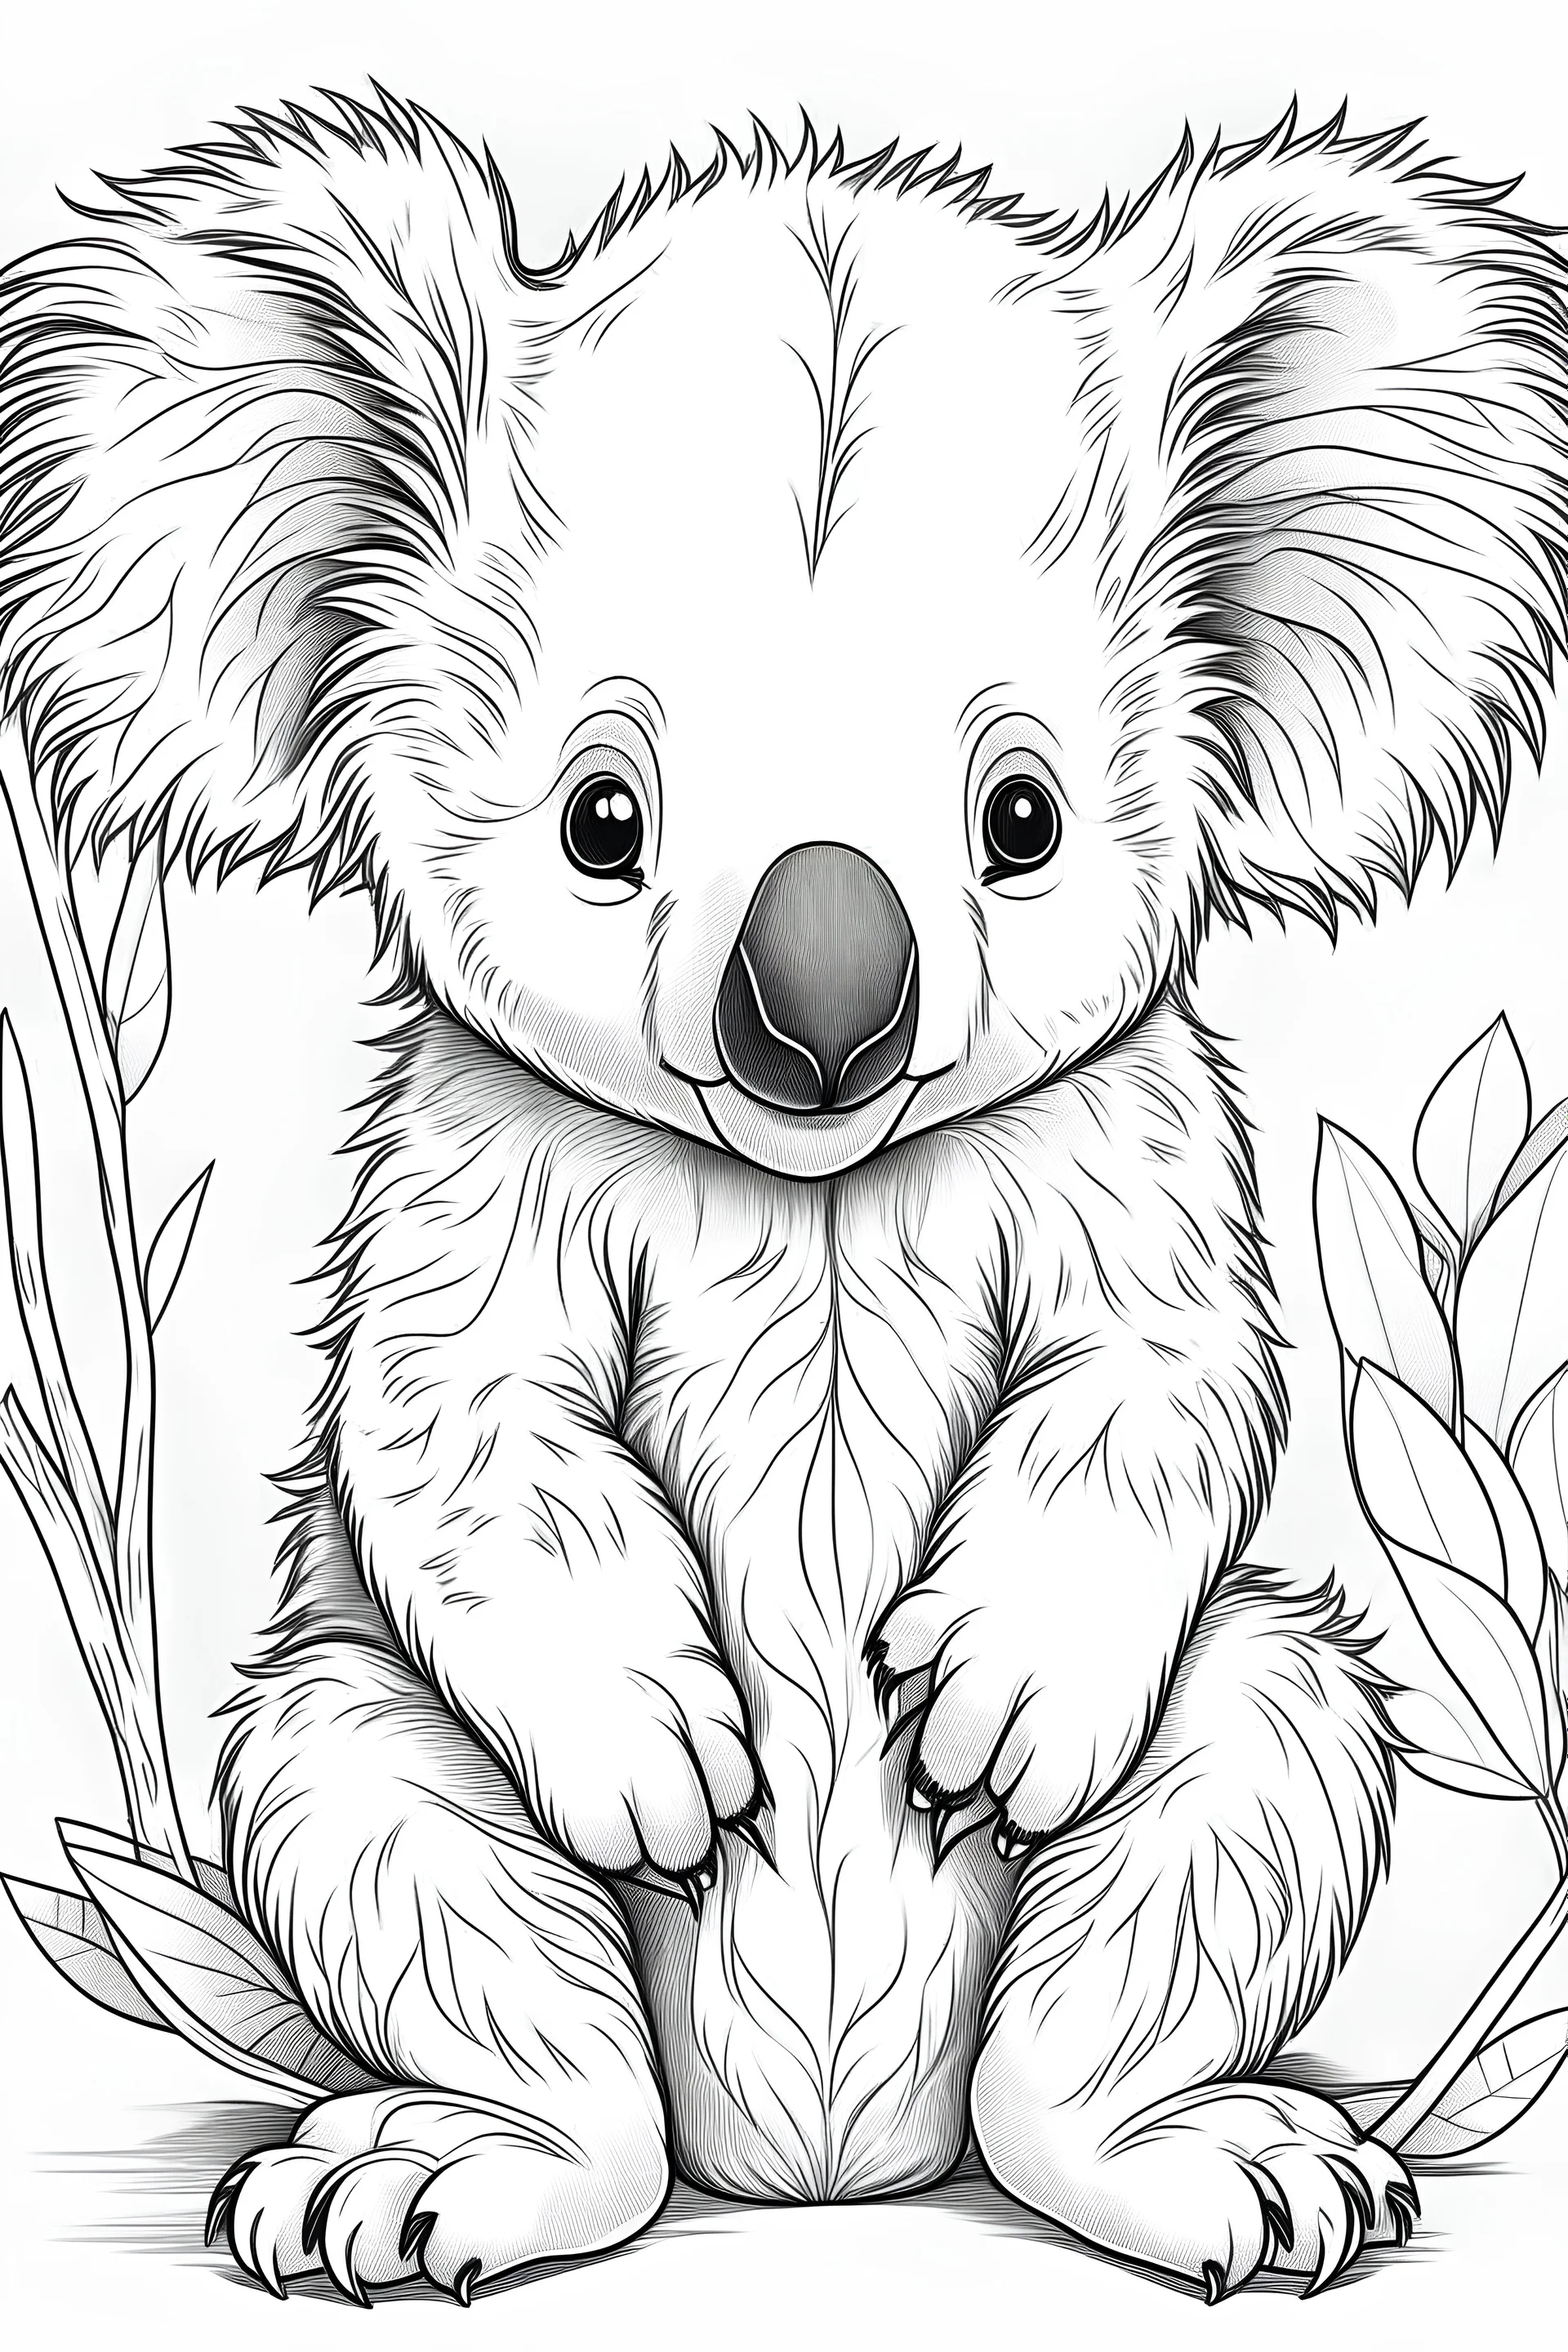 simple outlines art, bold outlines, clean and clear outlines, no tones color, no color, no detailed art, art full view, full body, wide angle, white background, a smiling cute baby koala